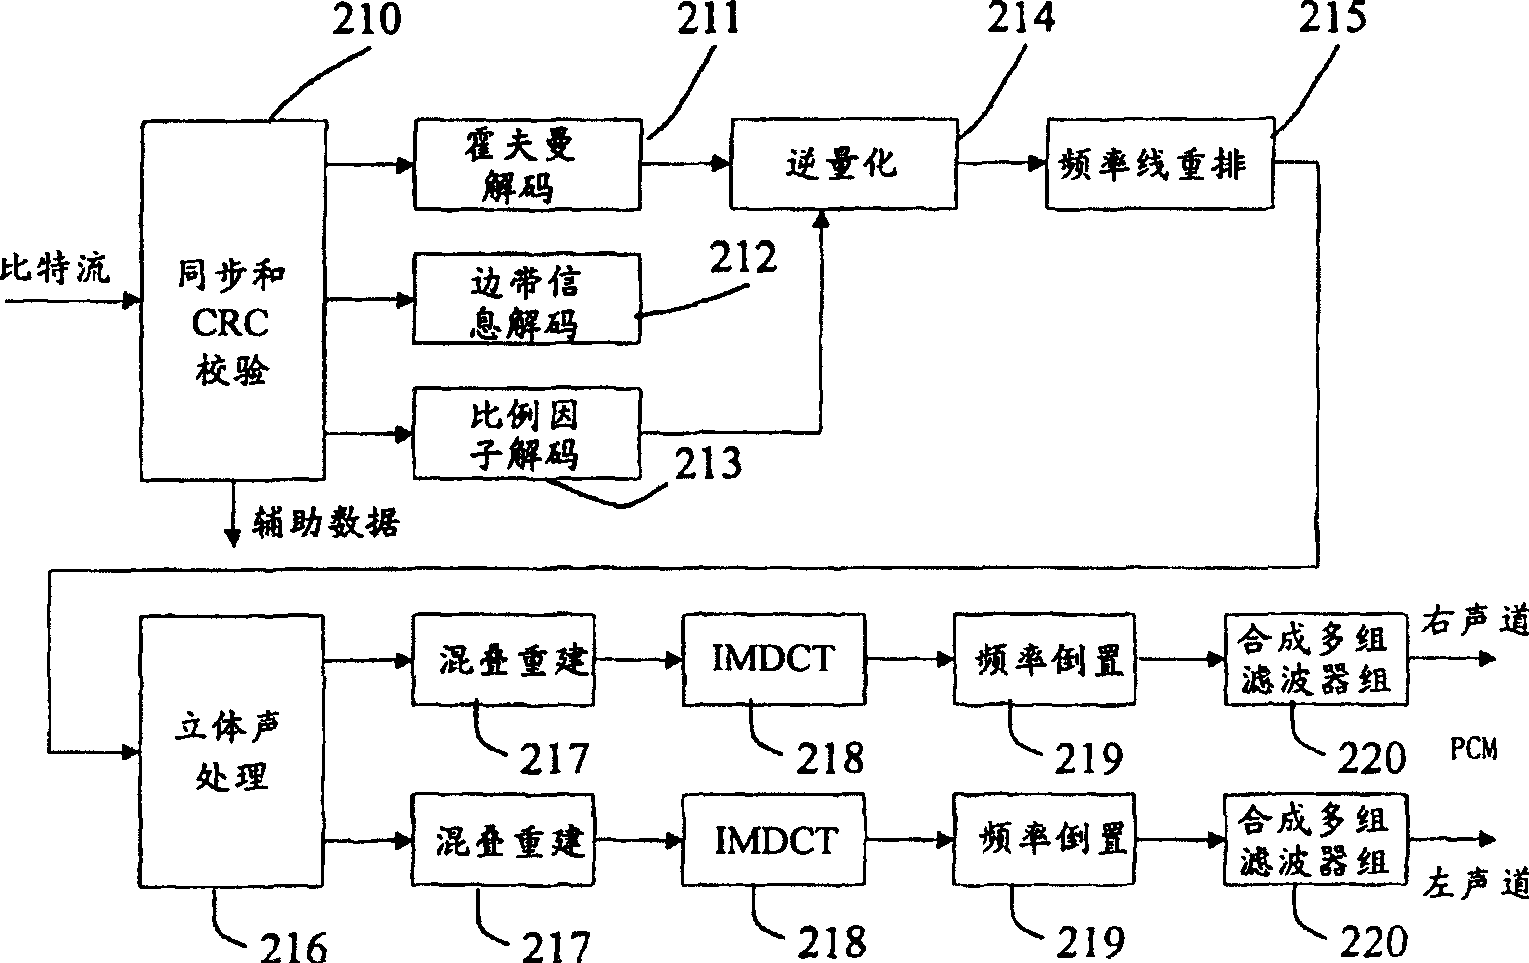 MP3 encoder with running water parallel process